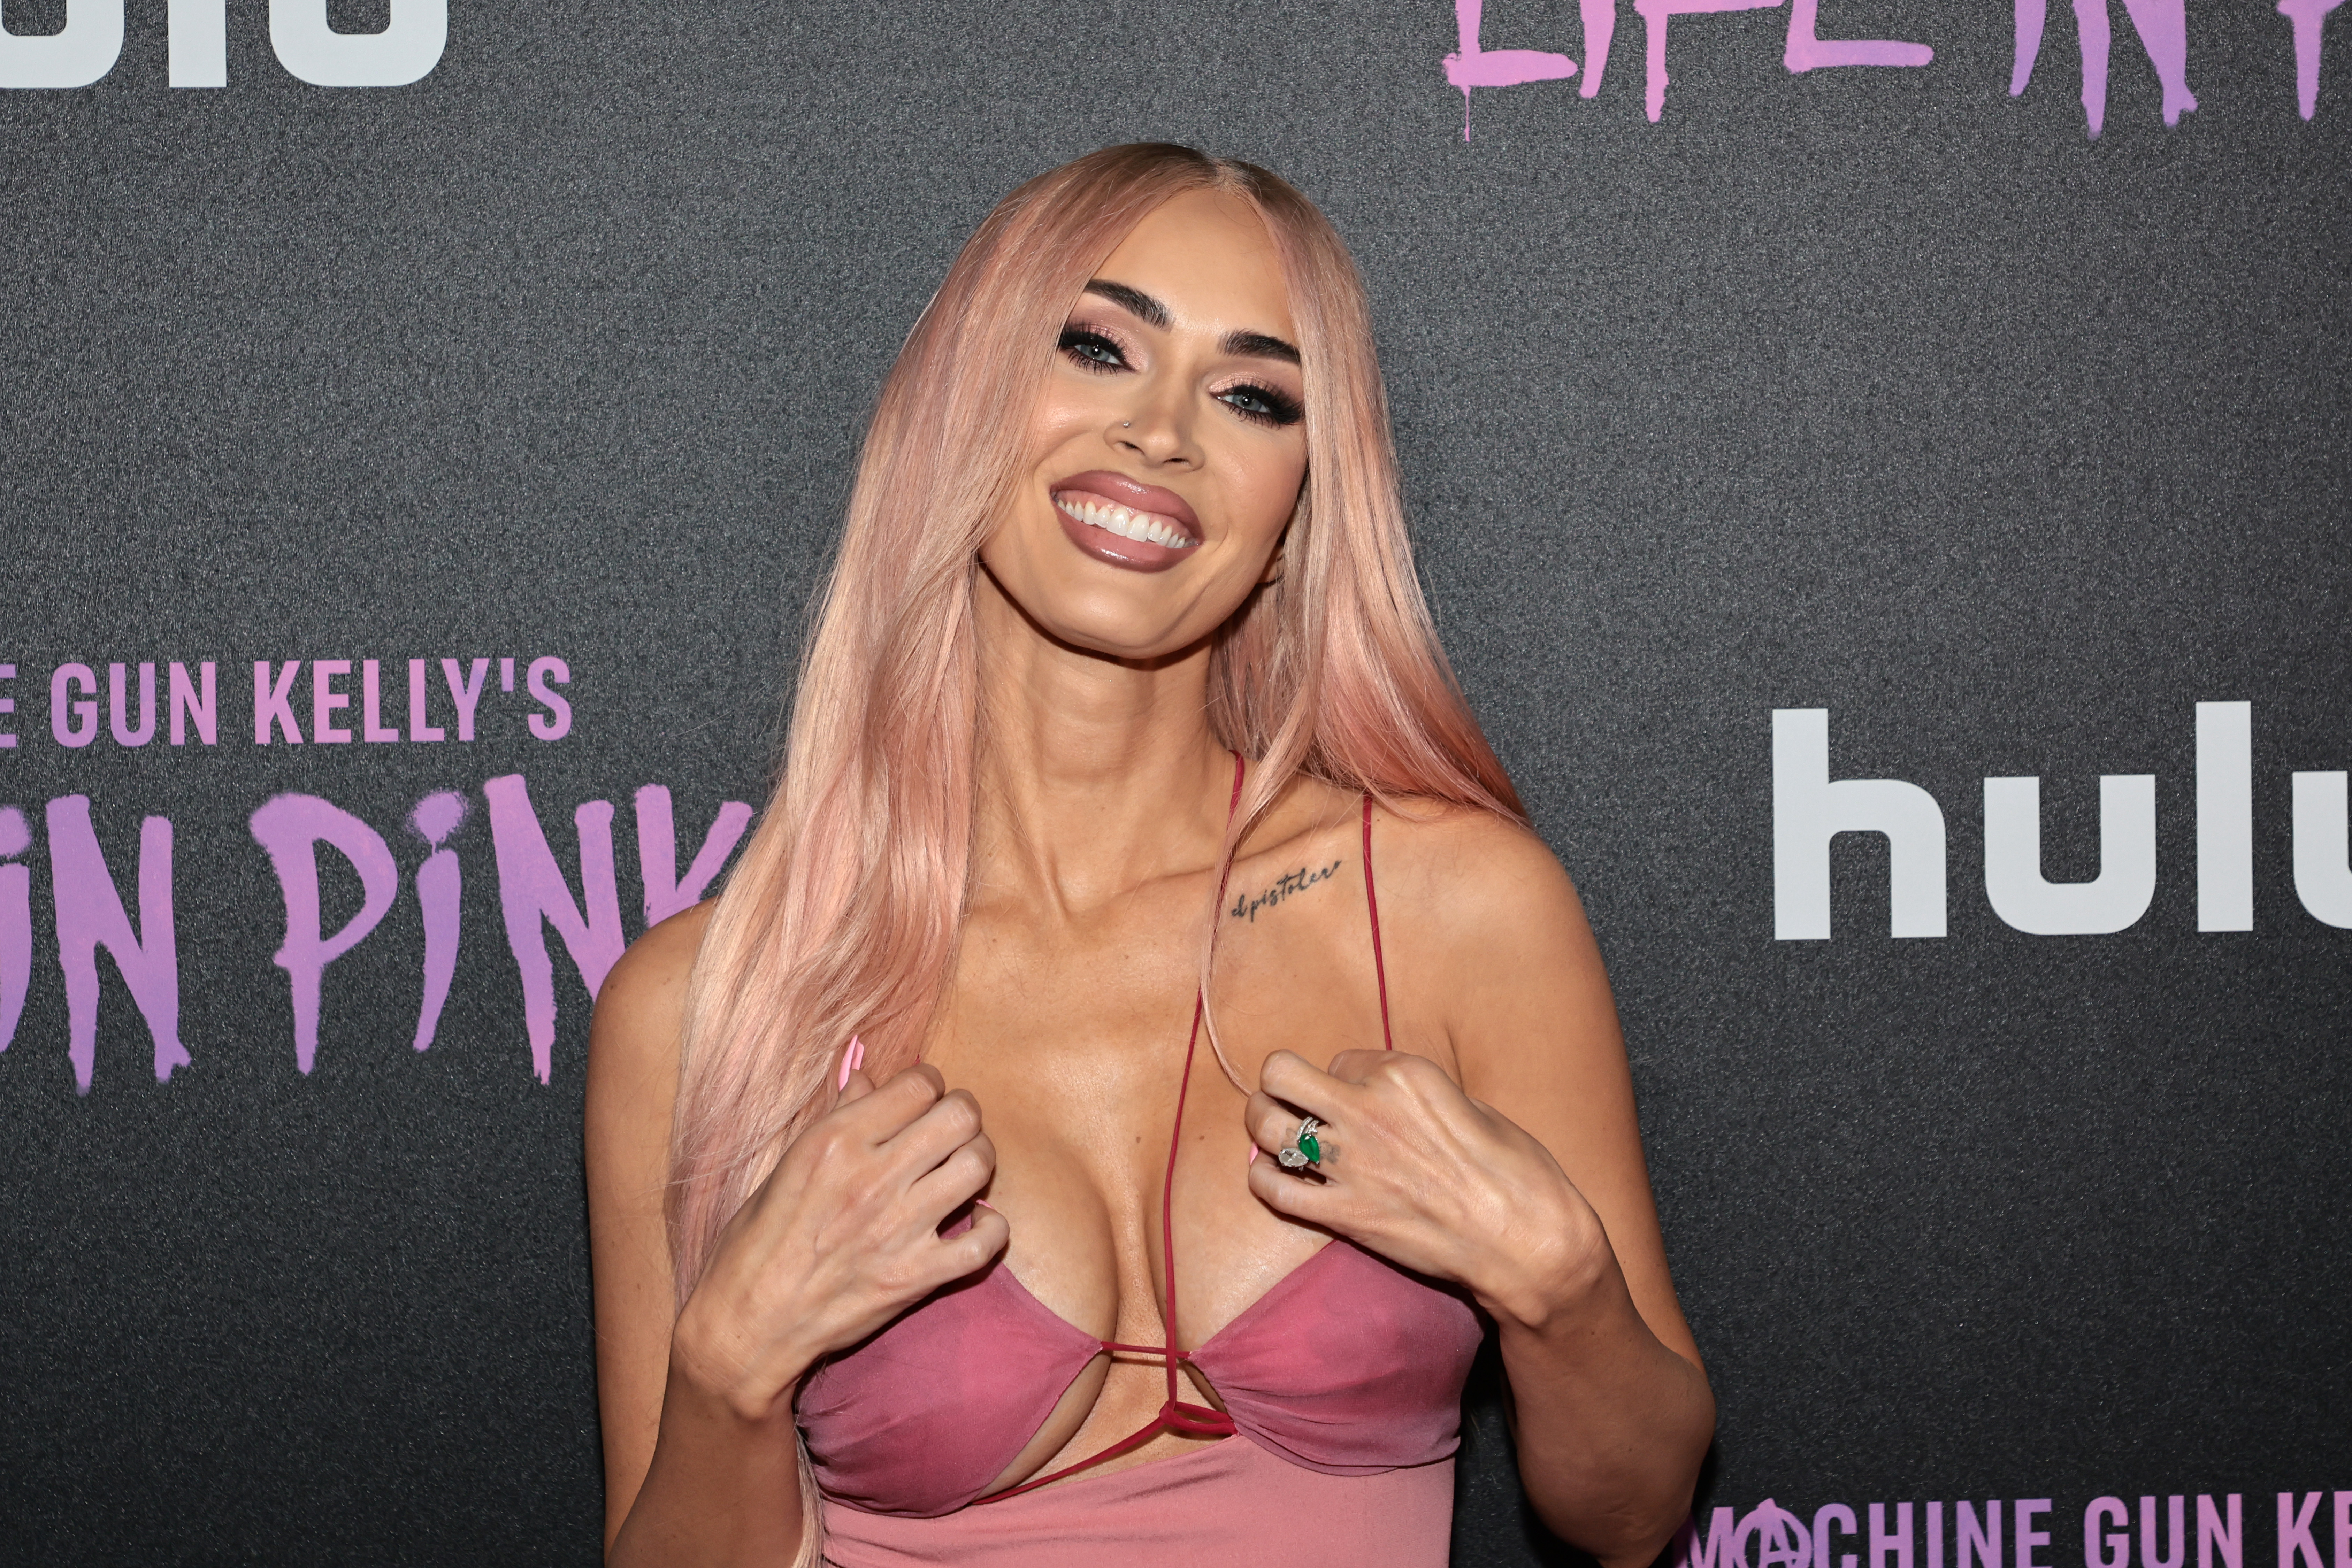 Megan Fox at the "Machine Gun Kelly's Life In Pink" premiere at on June 27, 2022 in New York City | Source: Getty Images